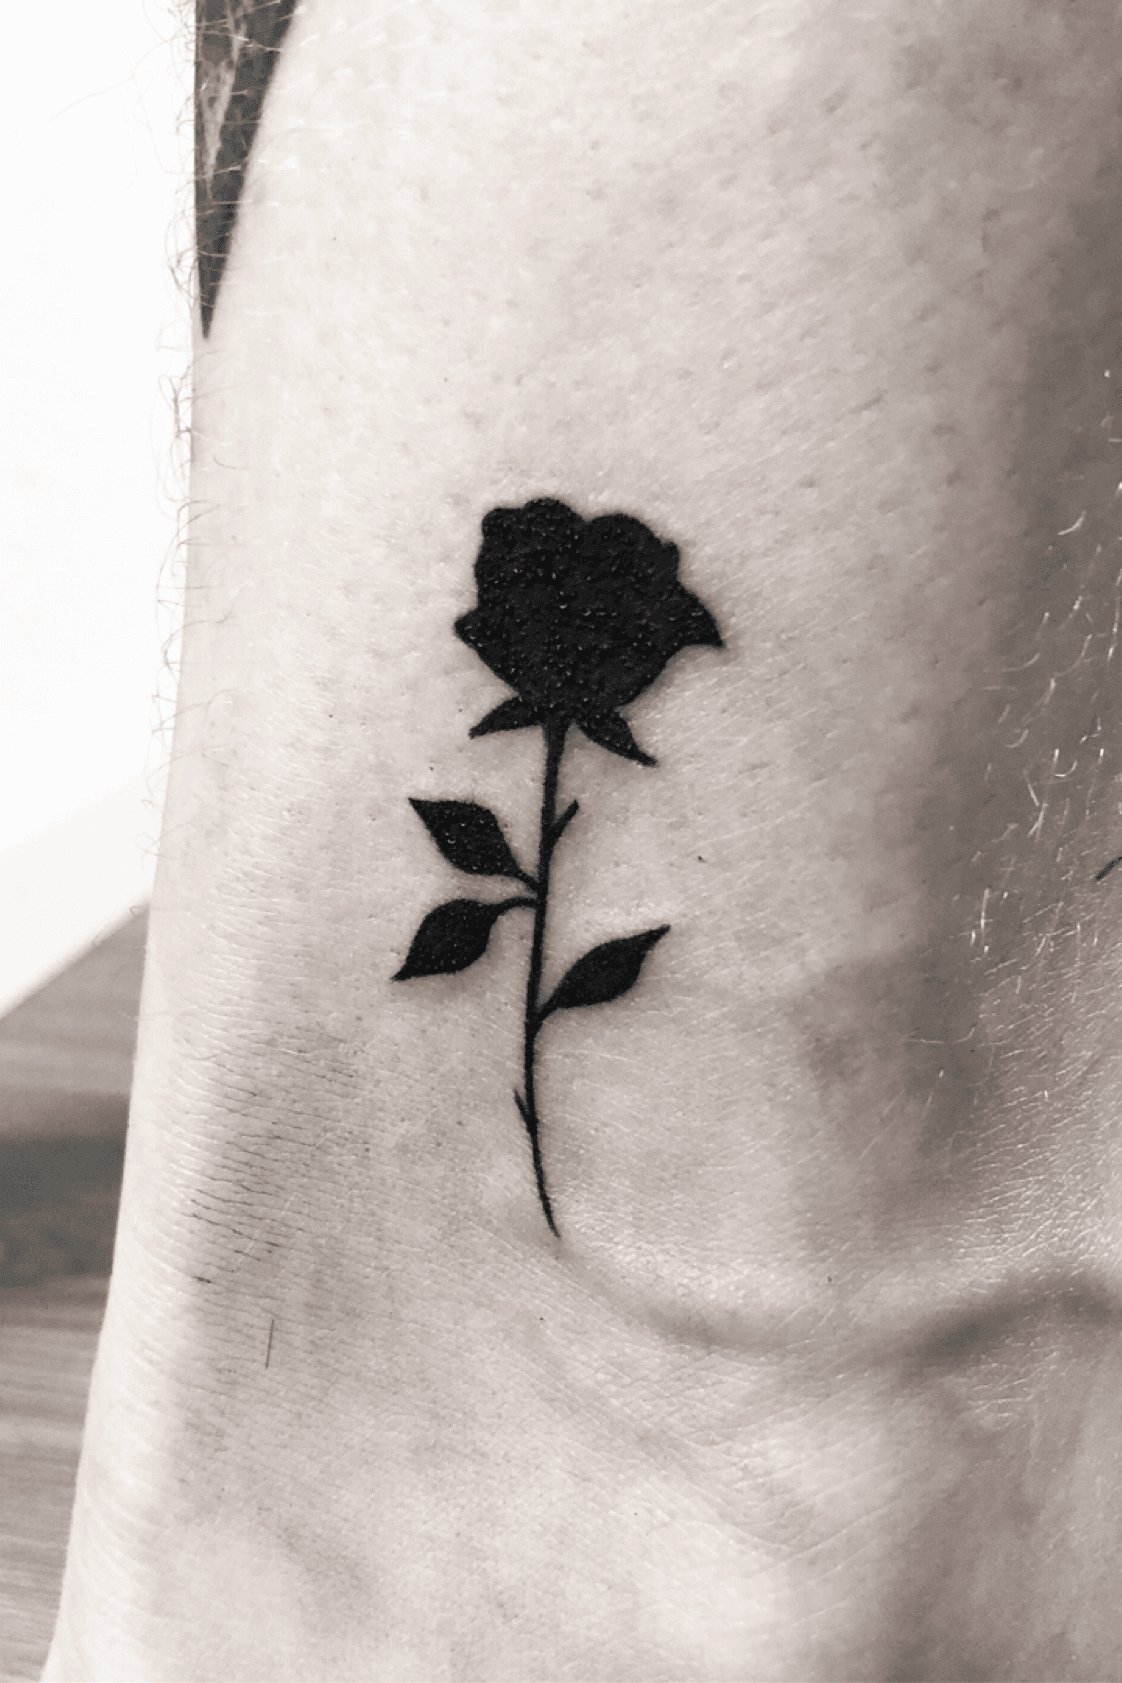 40 OhSo Cool Blackout Tattoo Designs  Rise of a new Trend